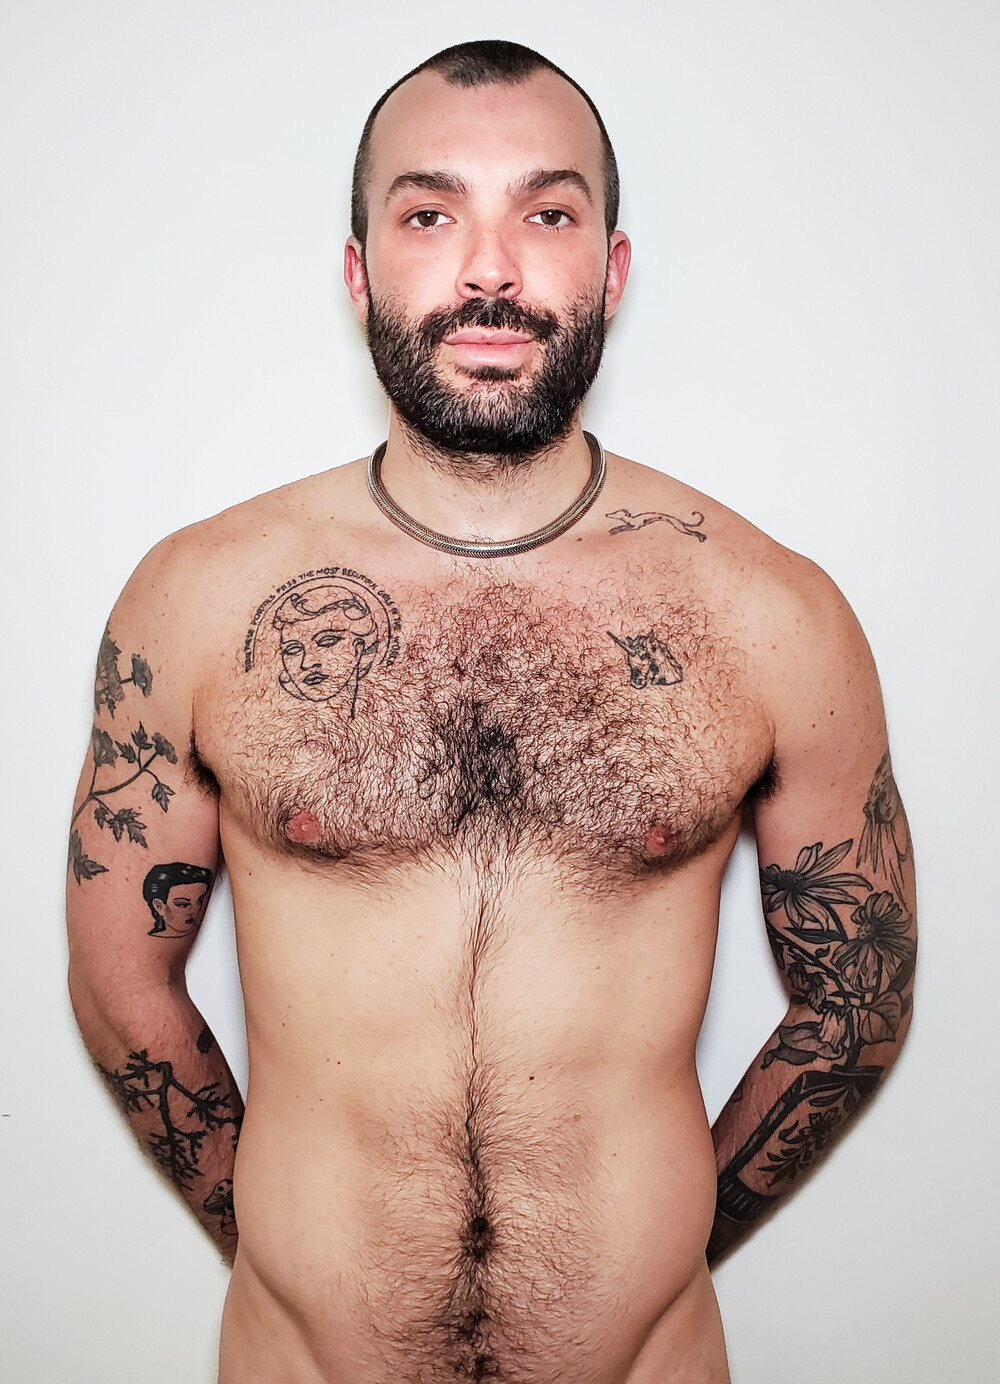 Paolo Bianchi | Gay Porn Star Database at WAYBIG